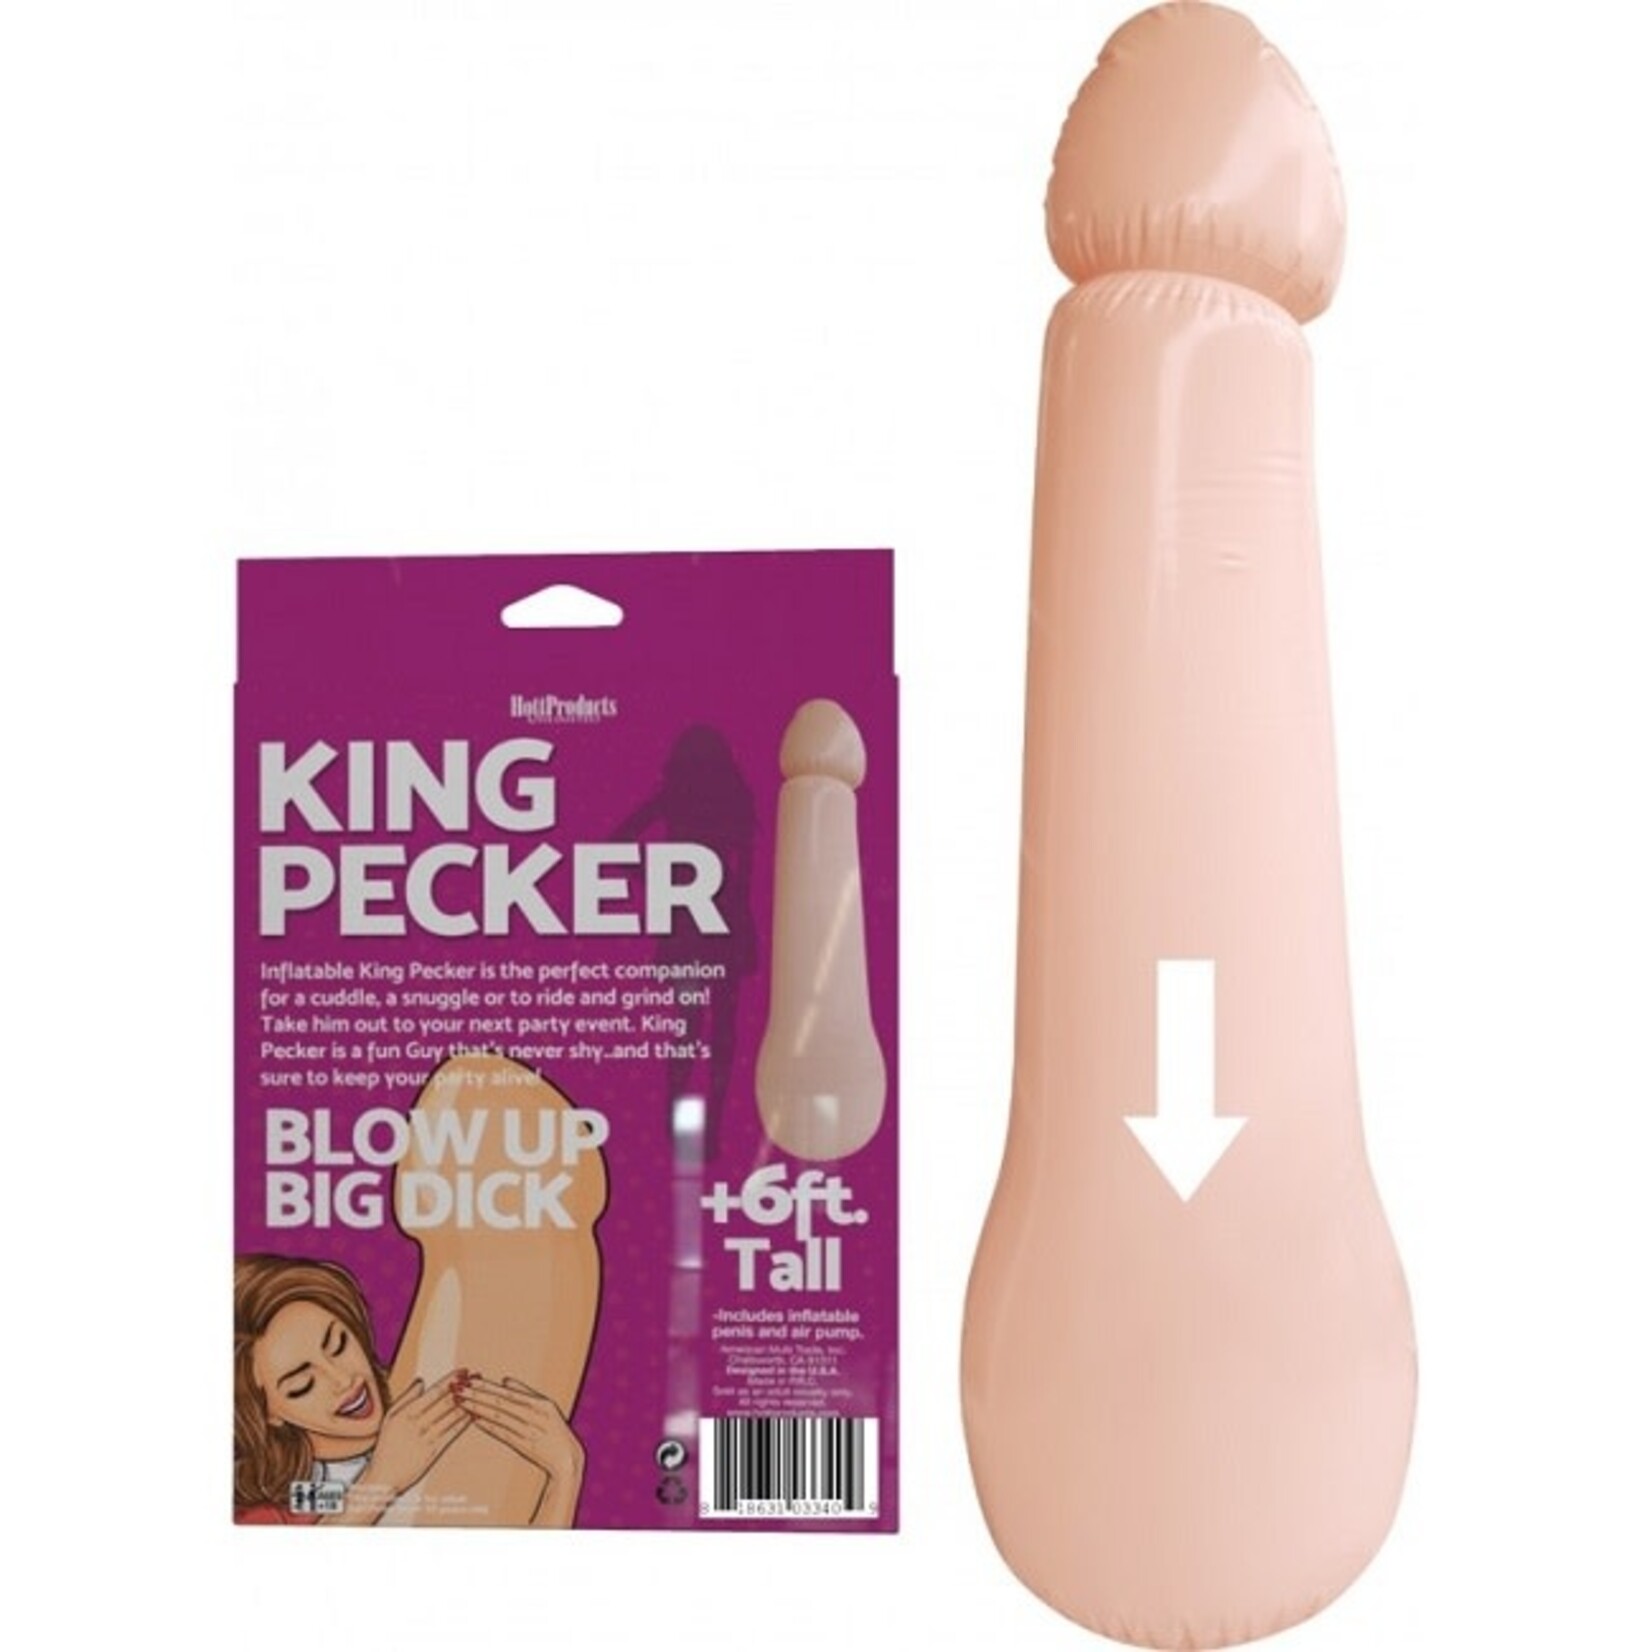 Hott Products King Pecker 6 Foot Tall Blow Up Dick